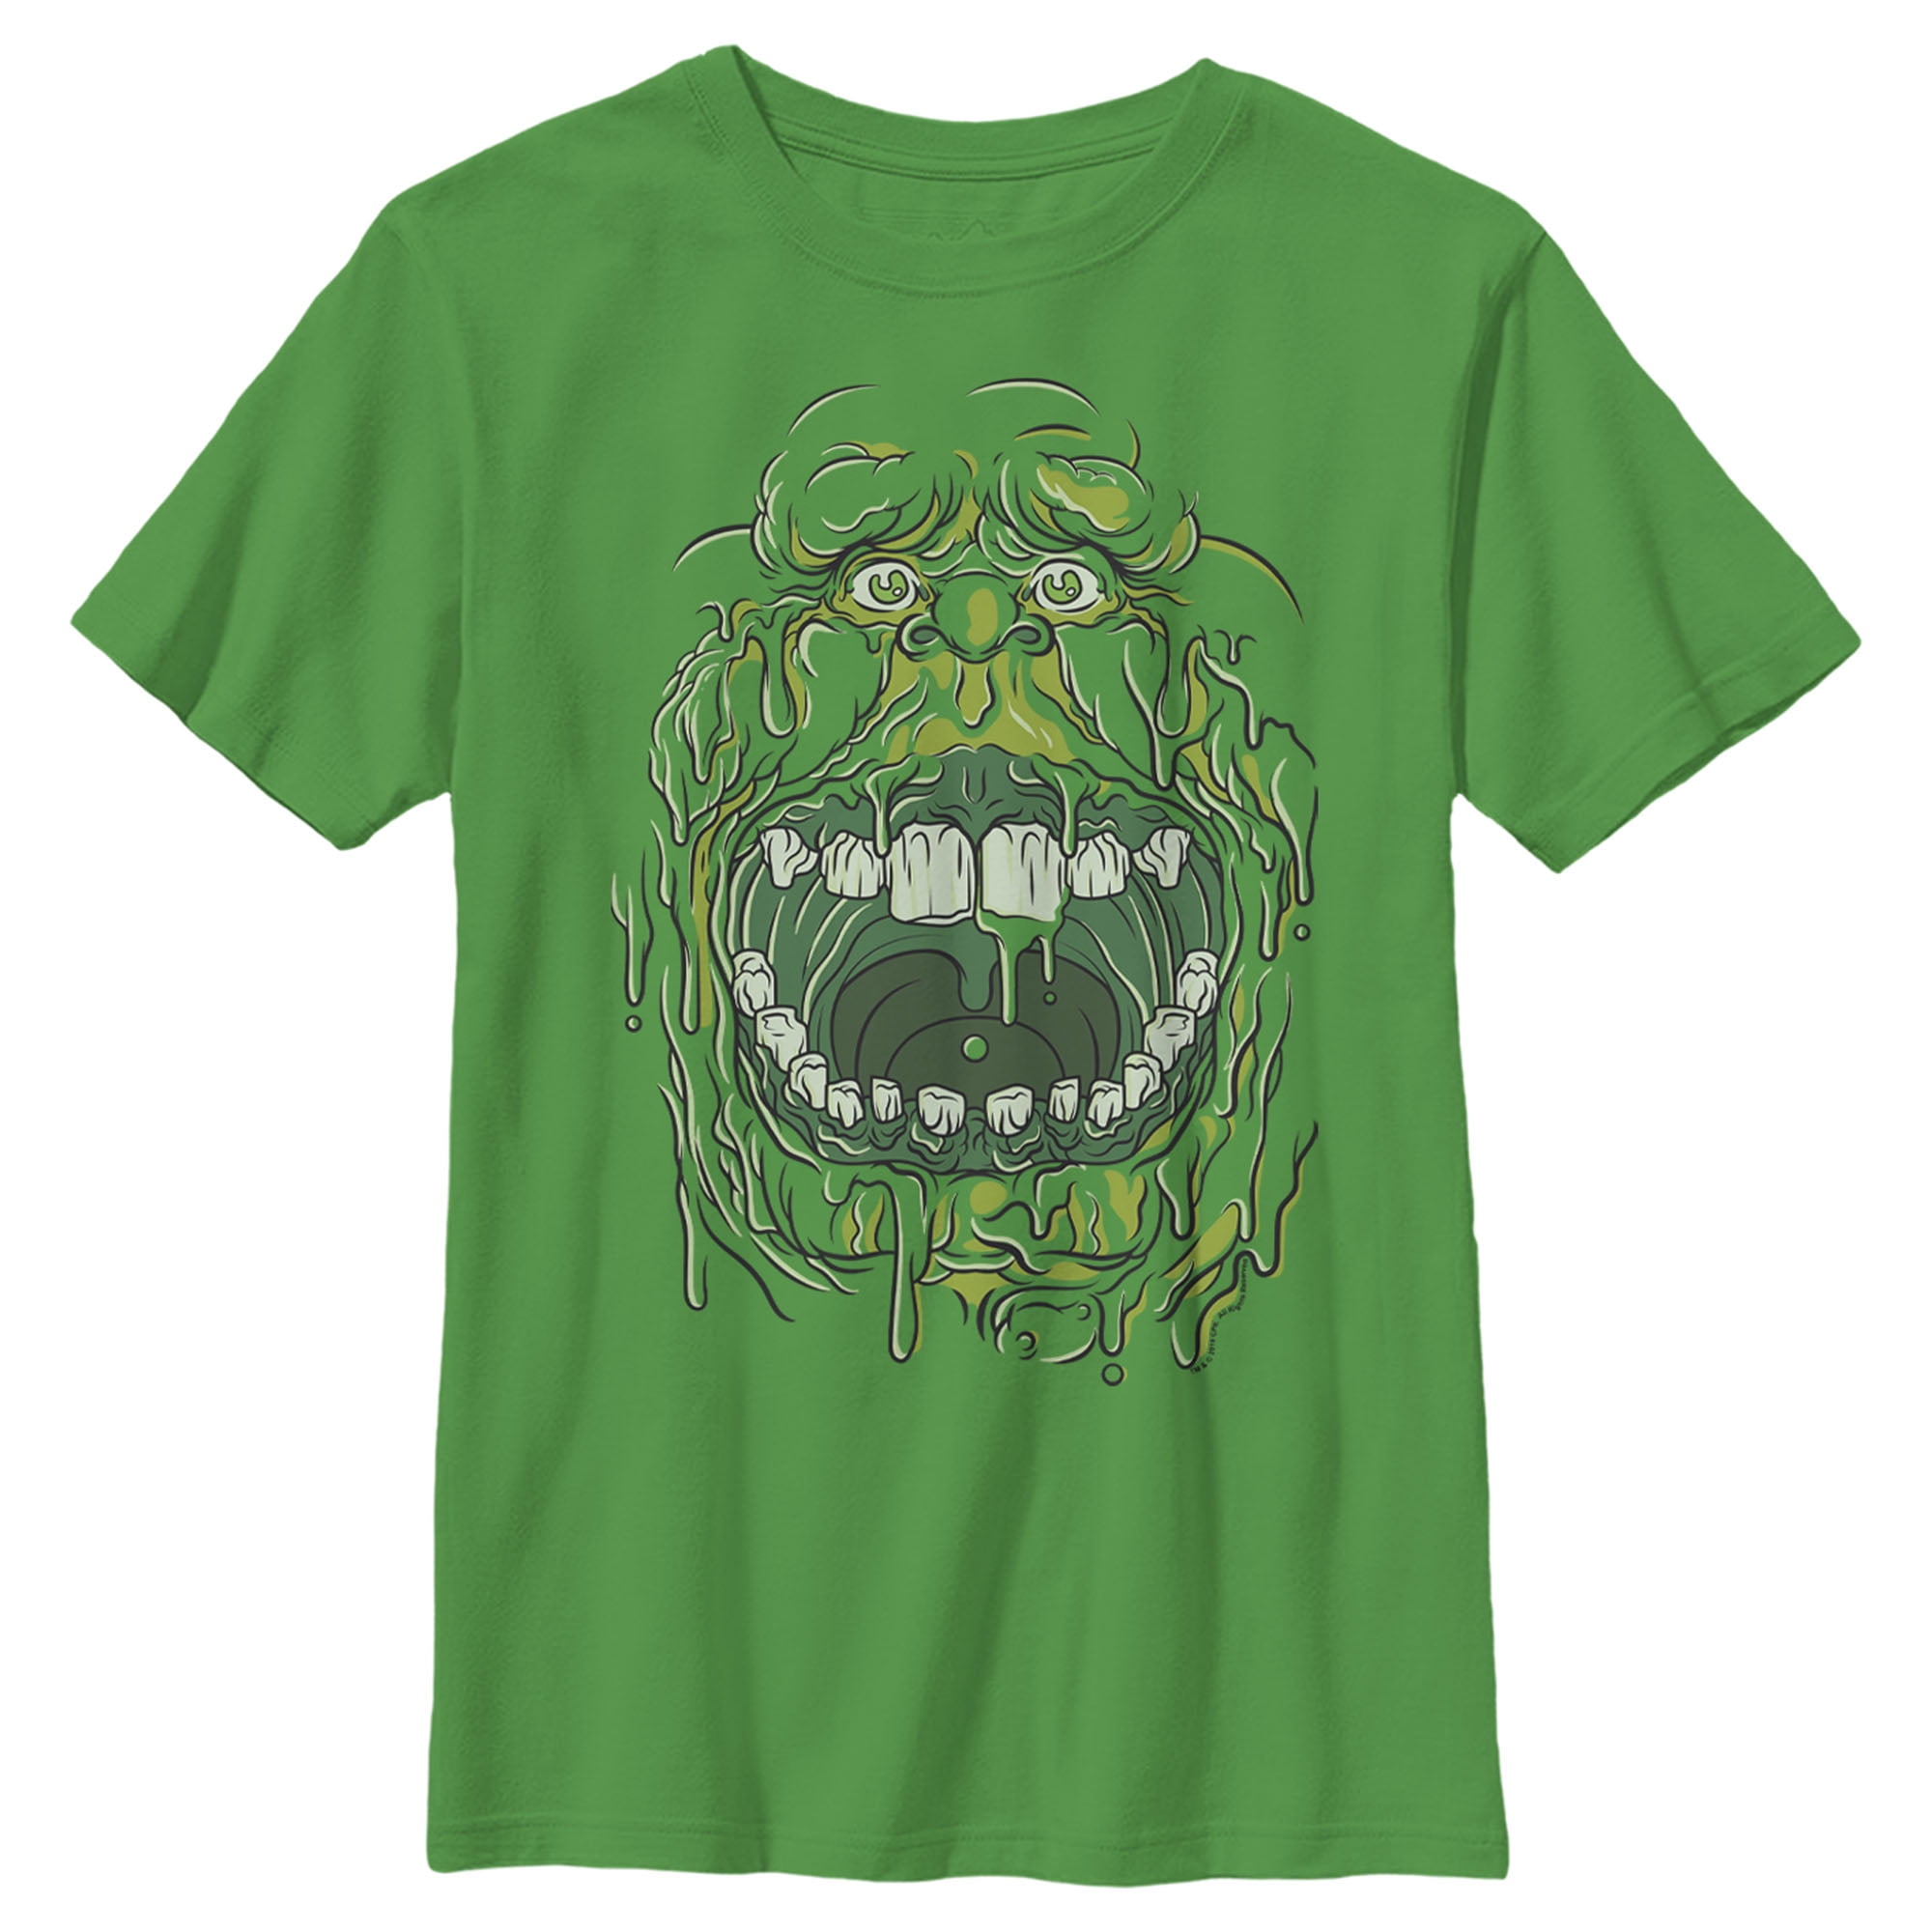 The Real Ghostbusters Kids T-Shirt Slimer Black Heather Tee 